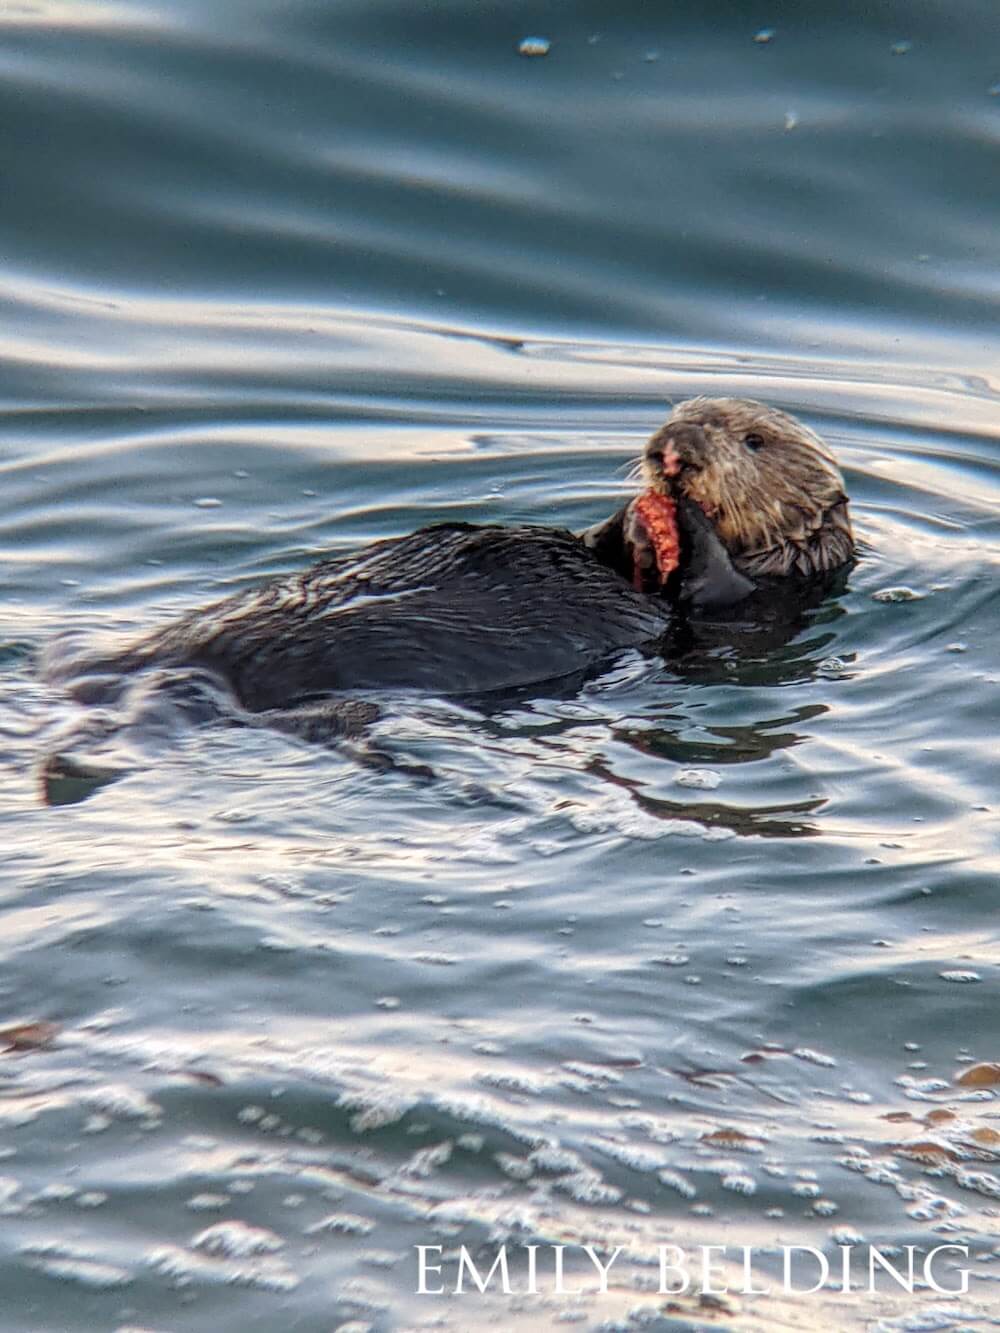 Sea otter snacking on a crab as it relaxedly floats along the water.